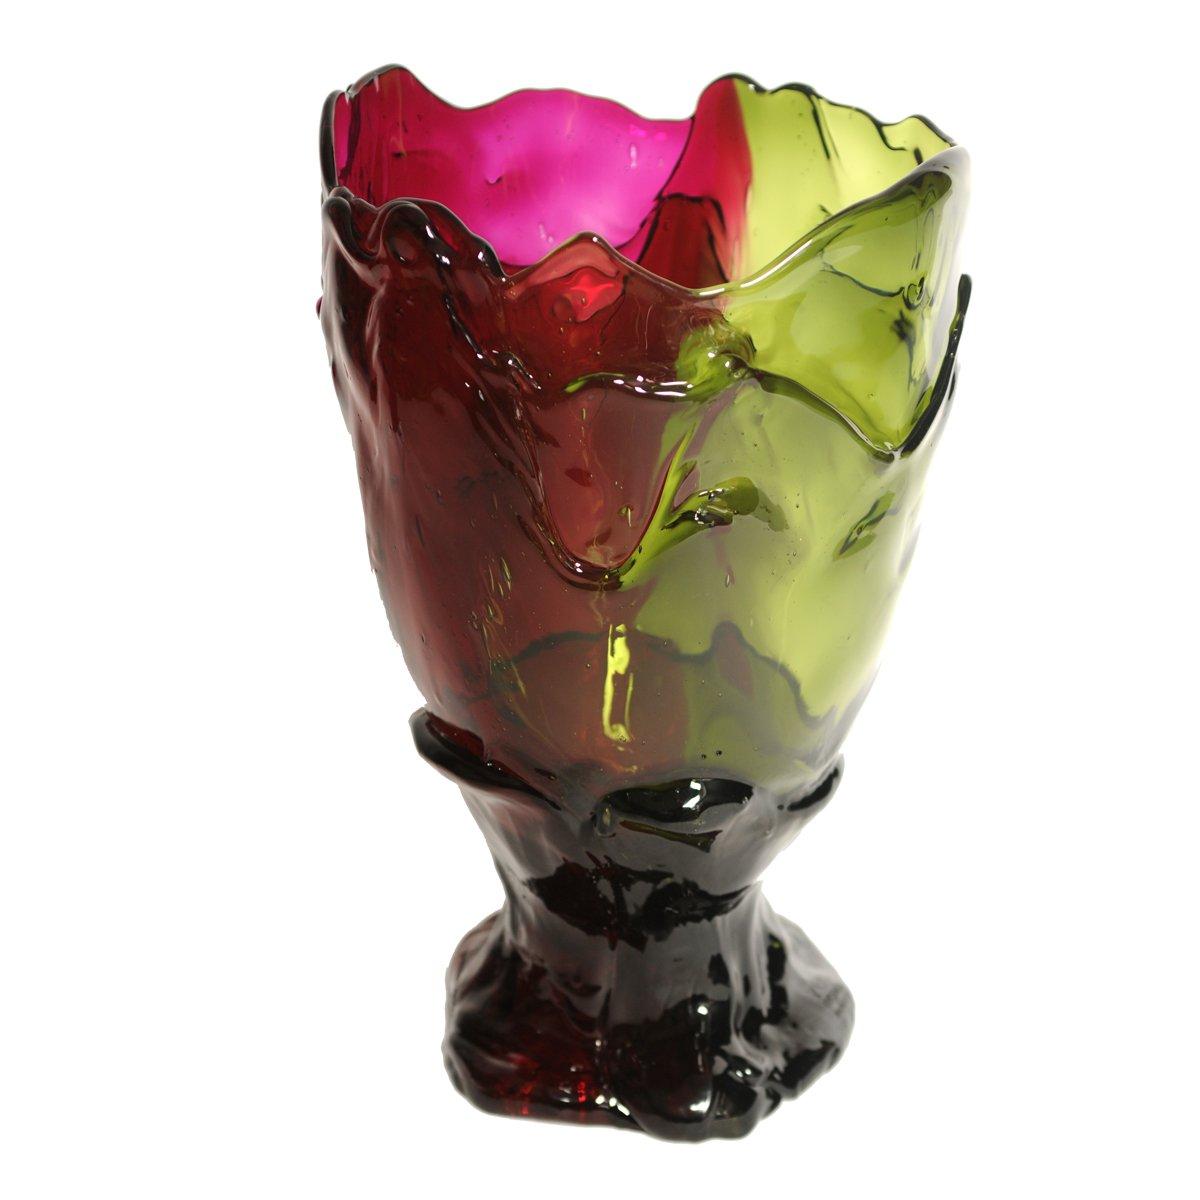 Twin-C vase, clear bottle green, clear fuchsia.

Vase in soft resin designed by Gaetano Pesce in 1995 for Fish Design collection.

Measures: M - ø 16cm x H 26cm.
Other sizes available.

Colours: clear bottle green, clear fuchsia

Vase in